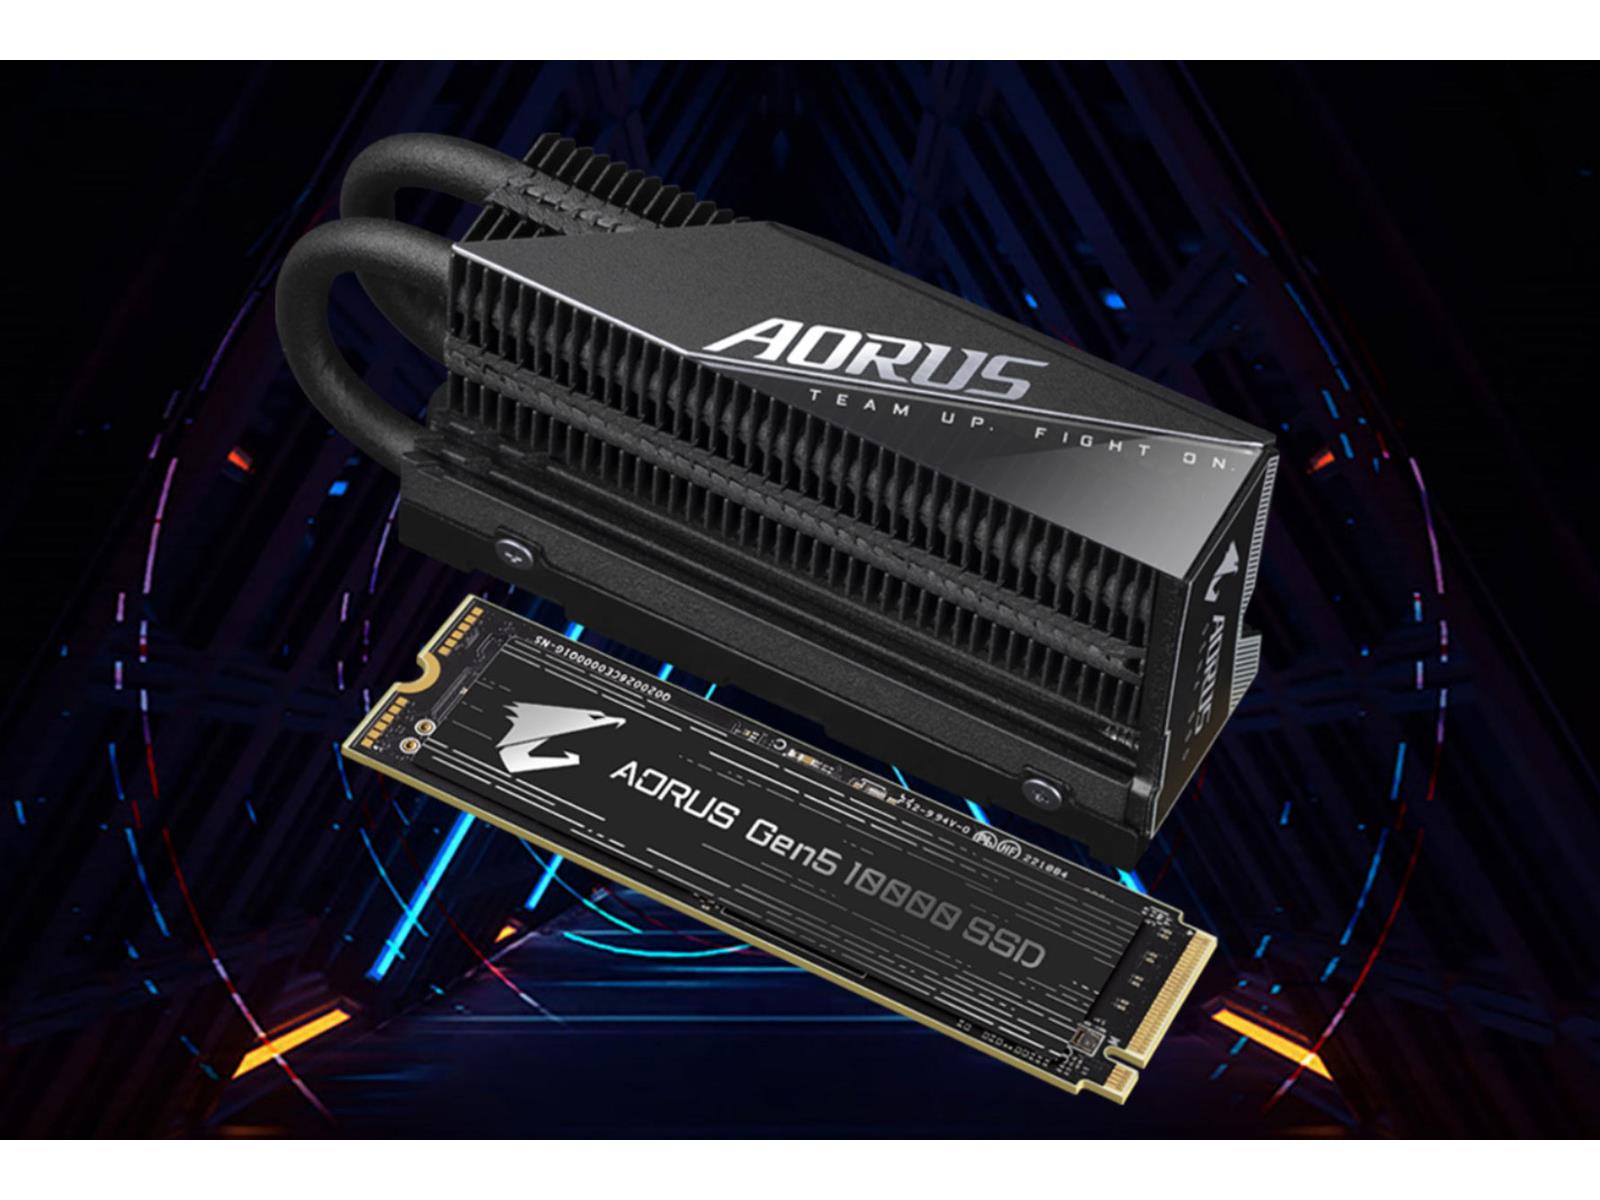 Gigabyte Tips PCIe Gen 5.0 SSD With 10,000MB/s Read and Write Speeds